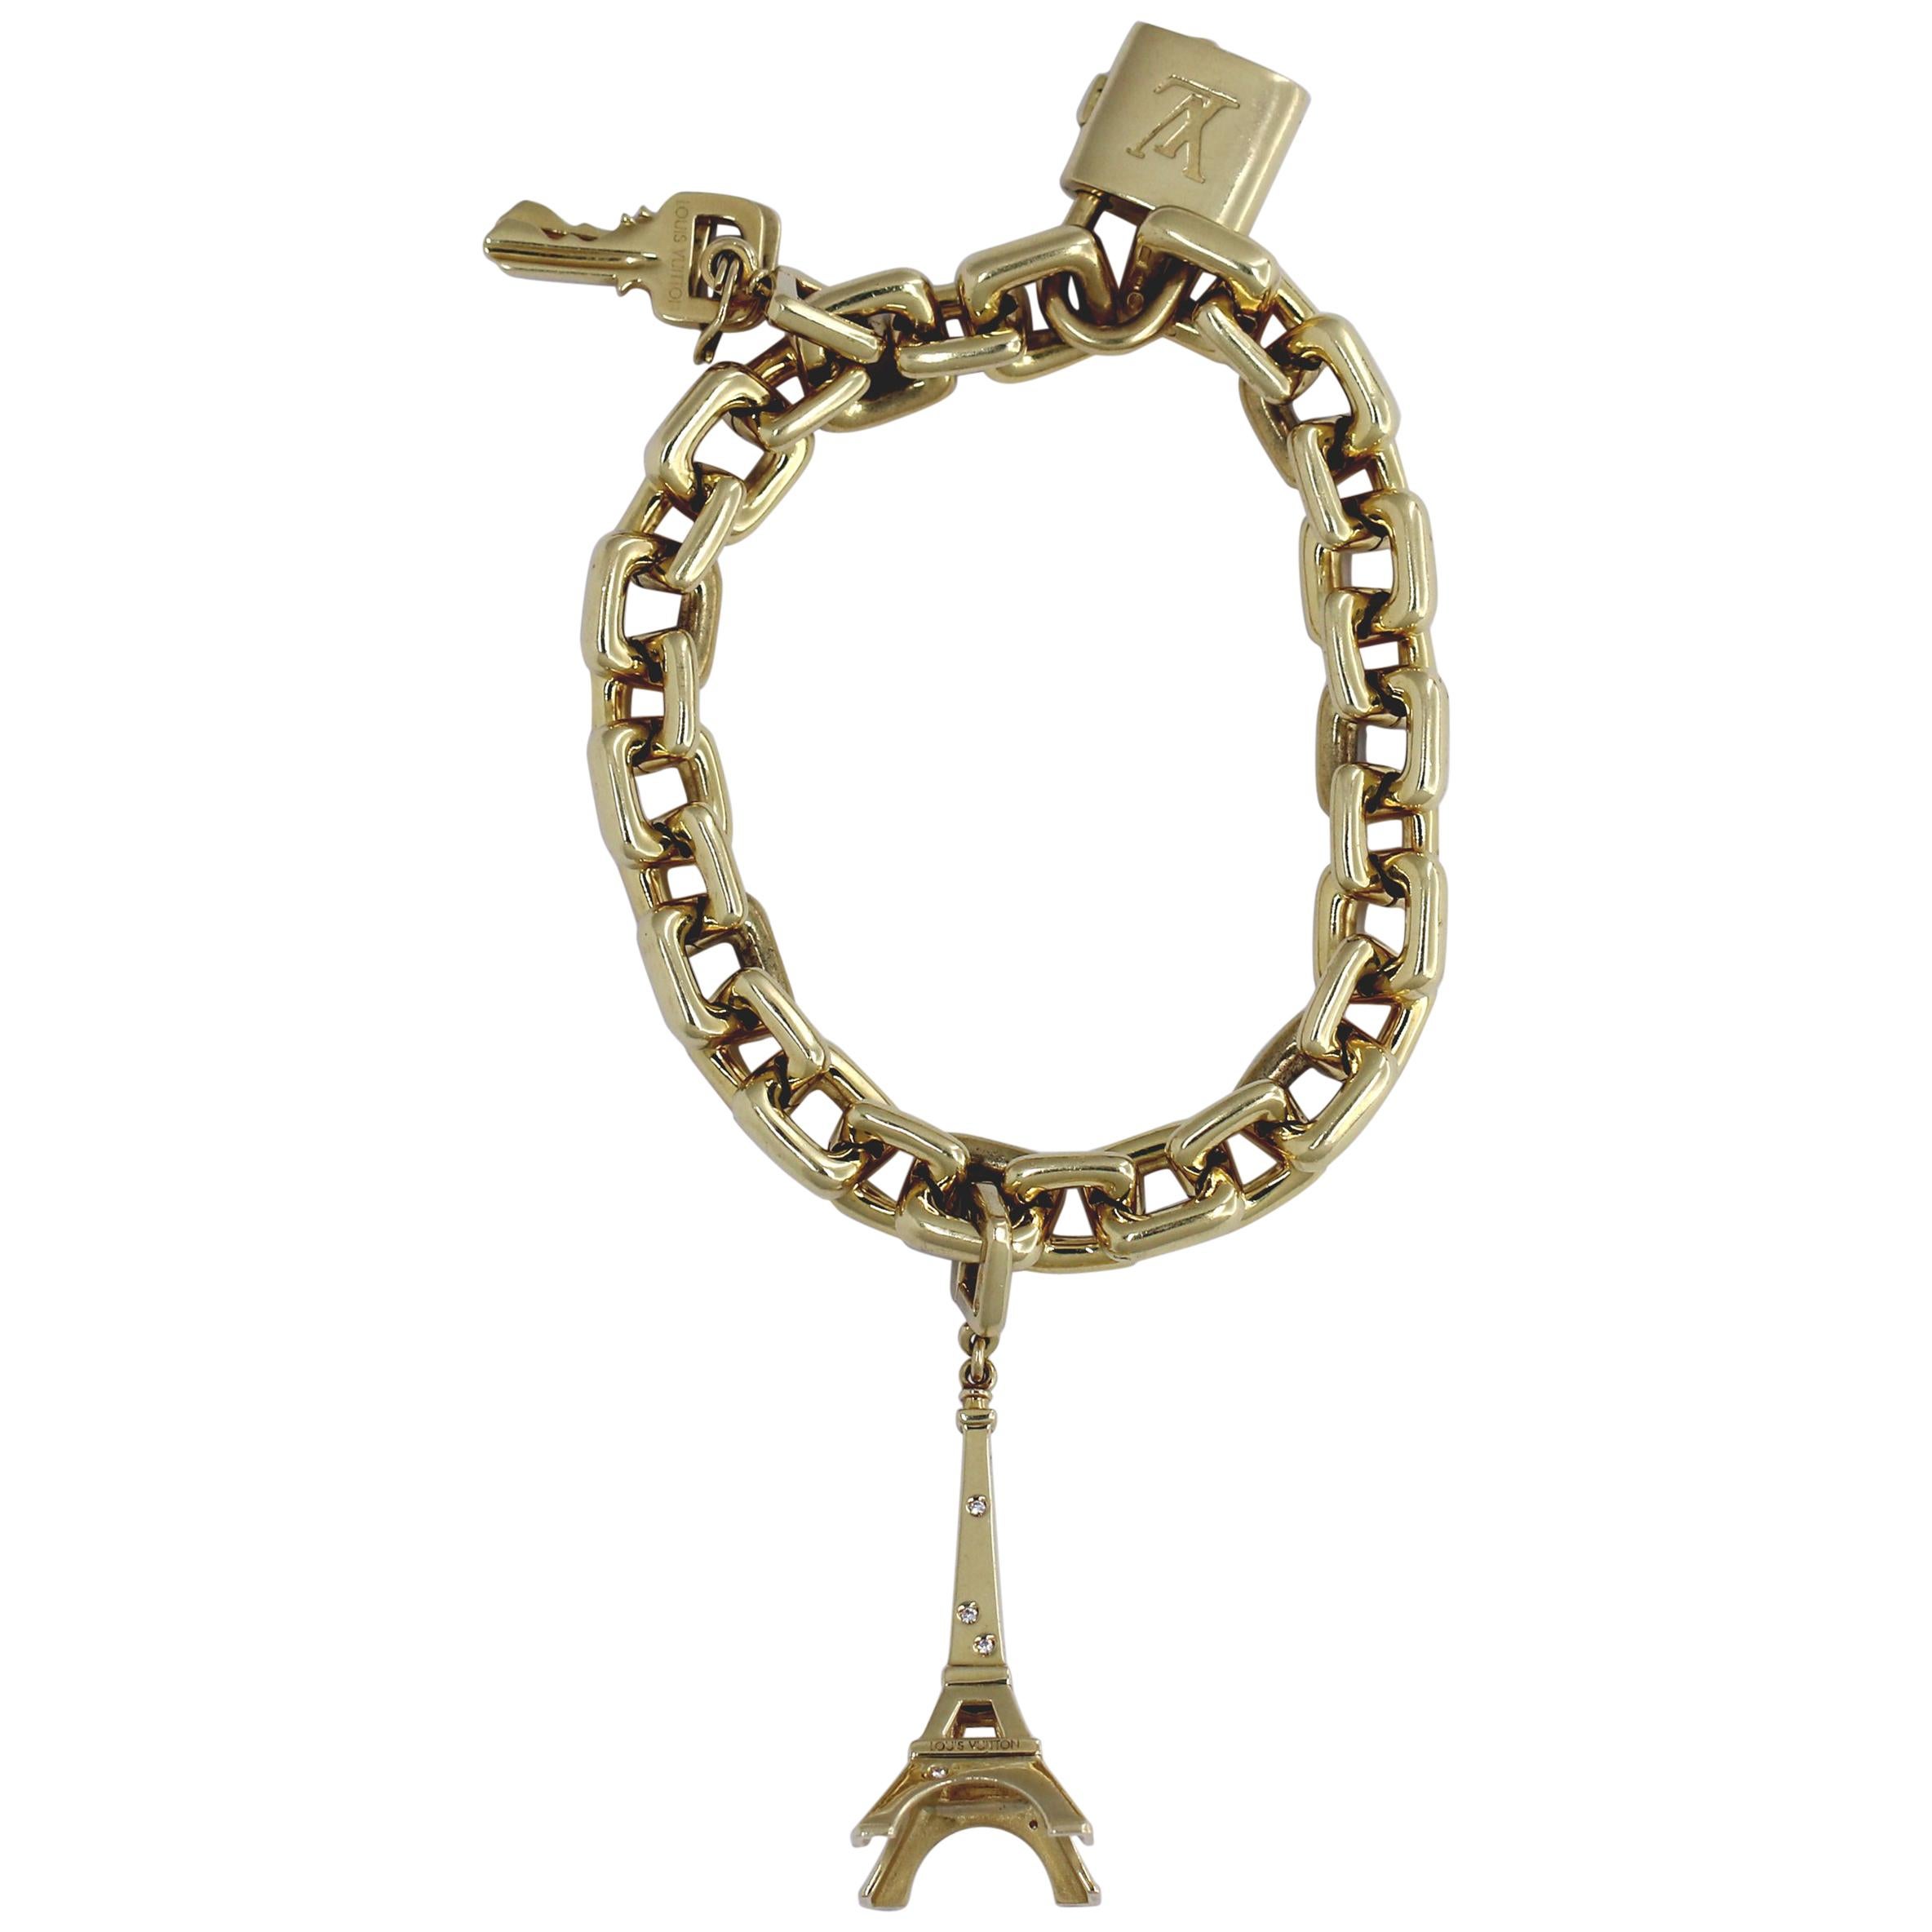 Louis Vuitton Gold Charm Bracelet with Lock and Key Clasp and Eiffel Tower Charm